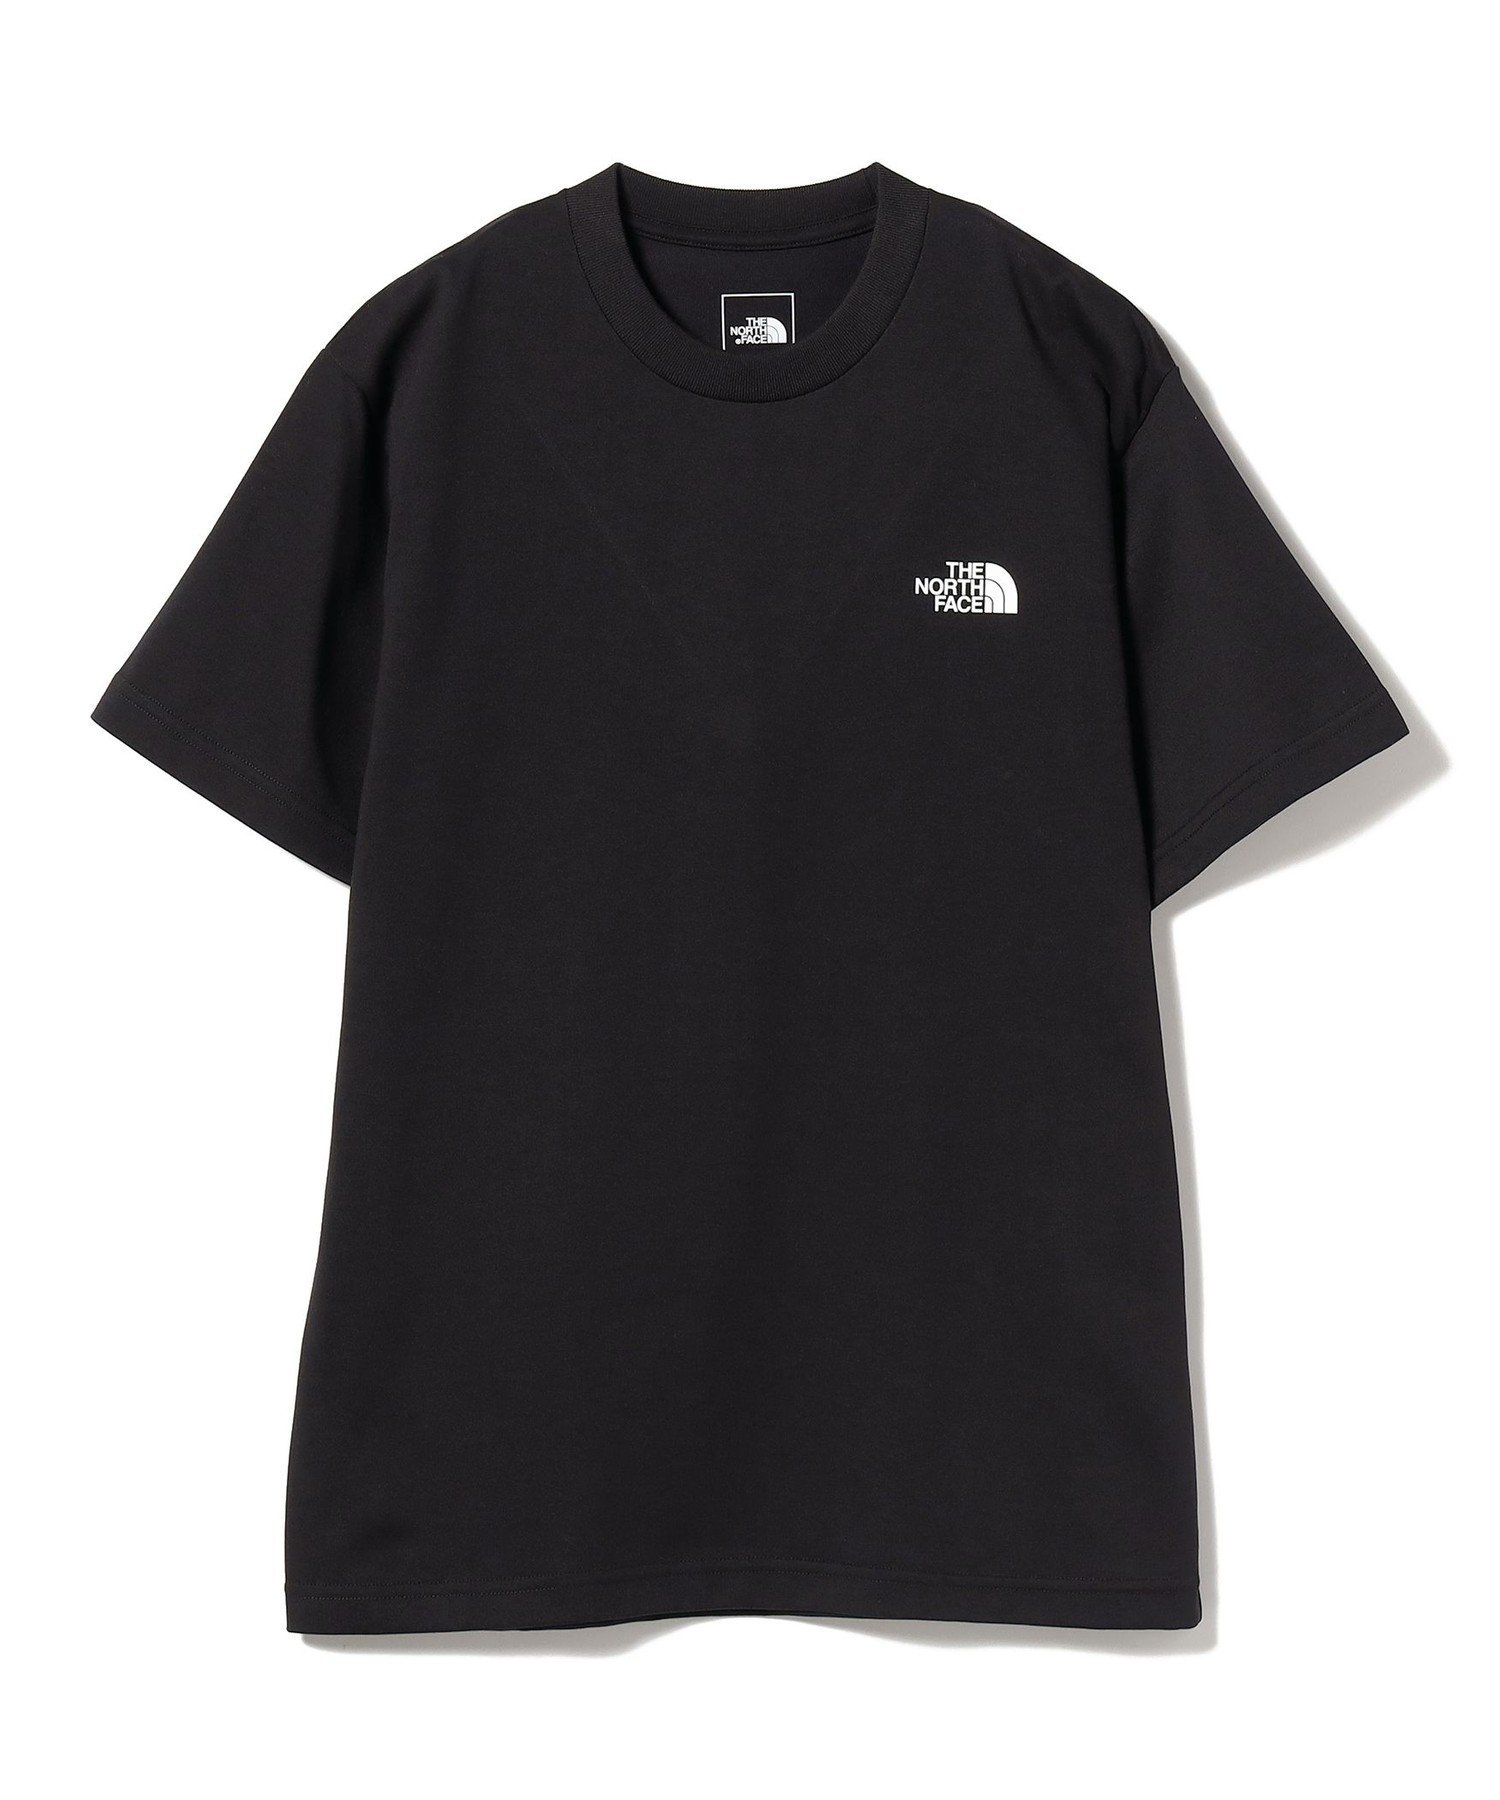 BEAMS BOY THE NORTH FACE / S/S Entrance Permission Tee ビームス ウイメン トップス カットソー・Tシャツ ブラック